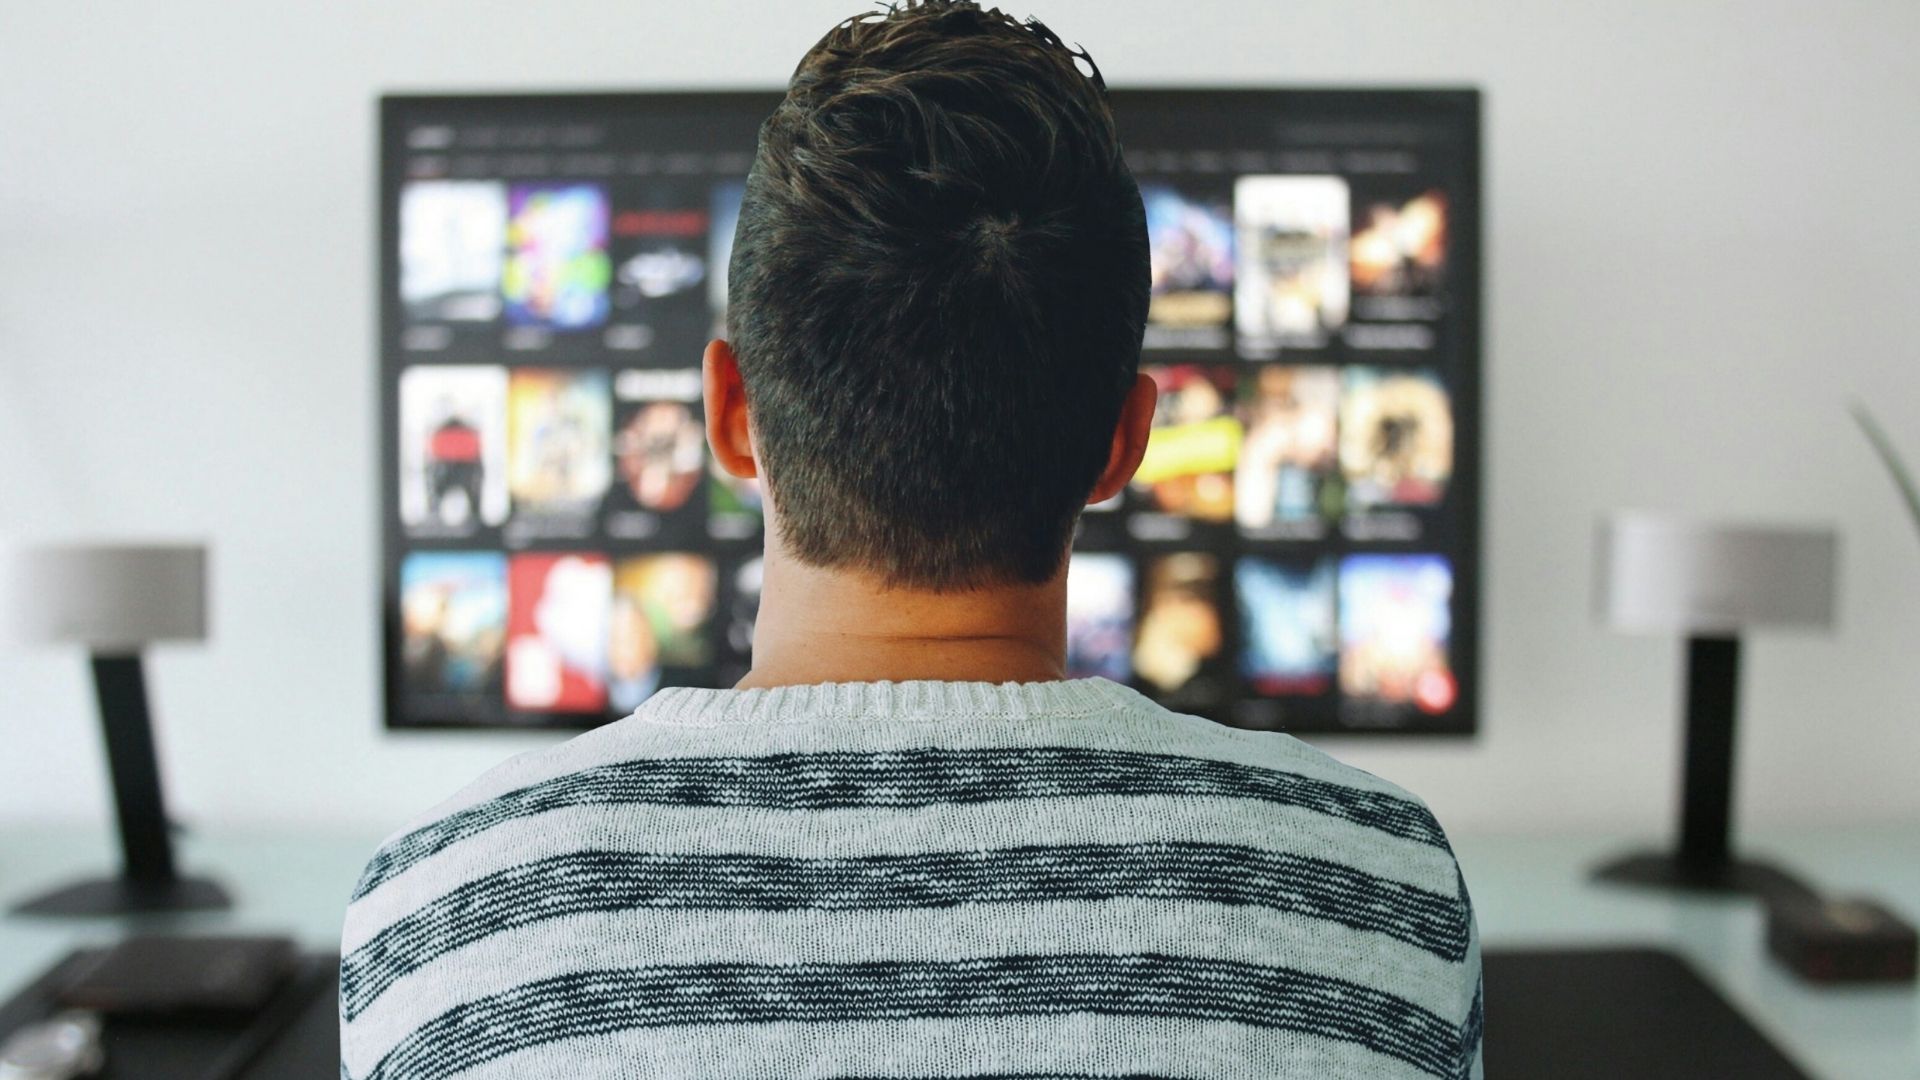 The psychology behind why it takes you a long time what to watch on TV